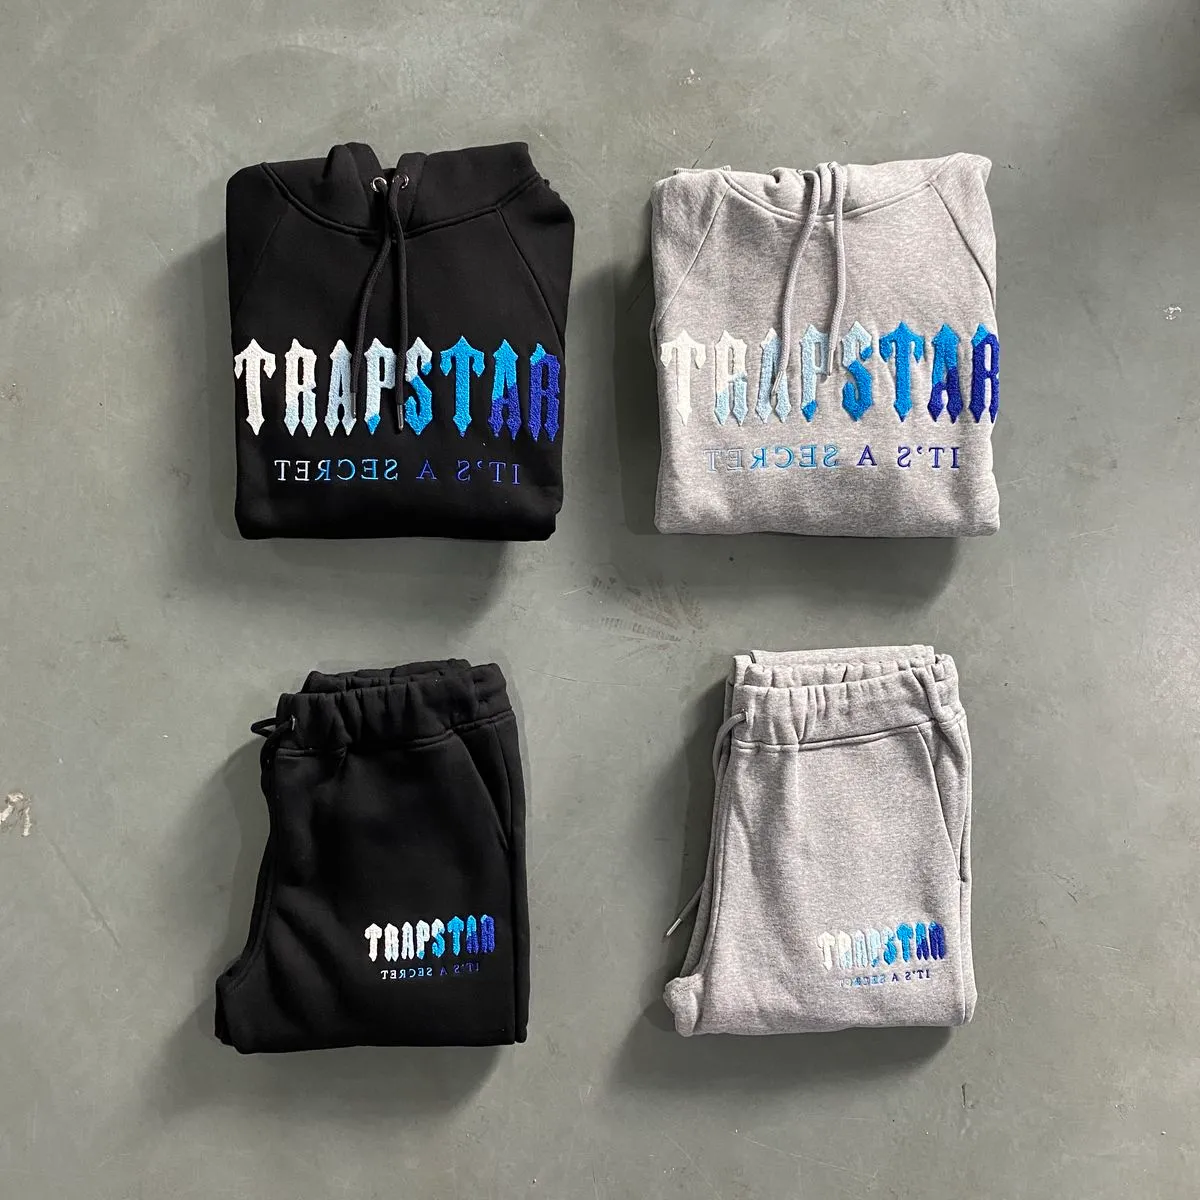 Men's Tracksuits 23SS Men Designer Trapstar Activewear Hoodie Chenille Set Jit Flavors 2.0 Edition 1to1 top Quality Size XS XXL